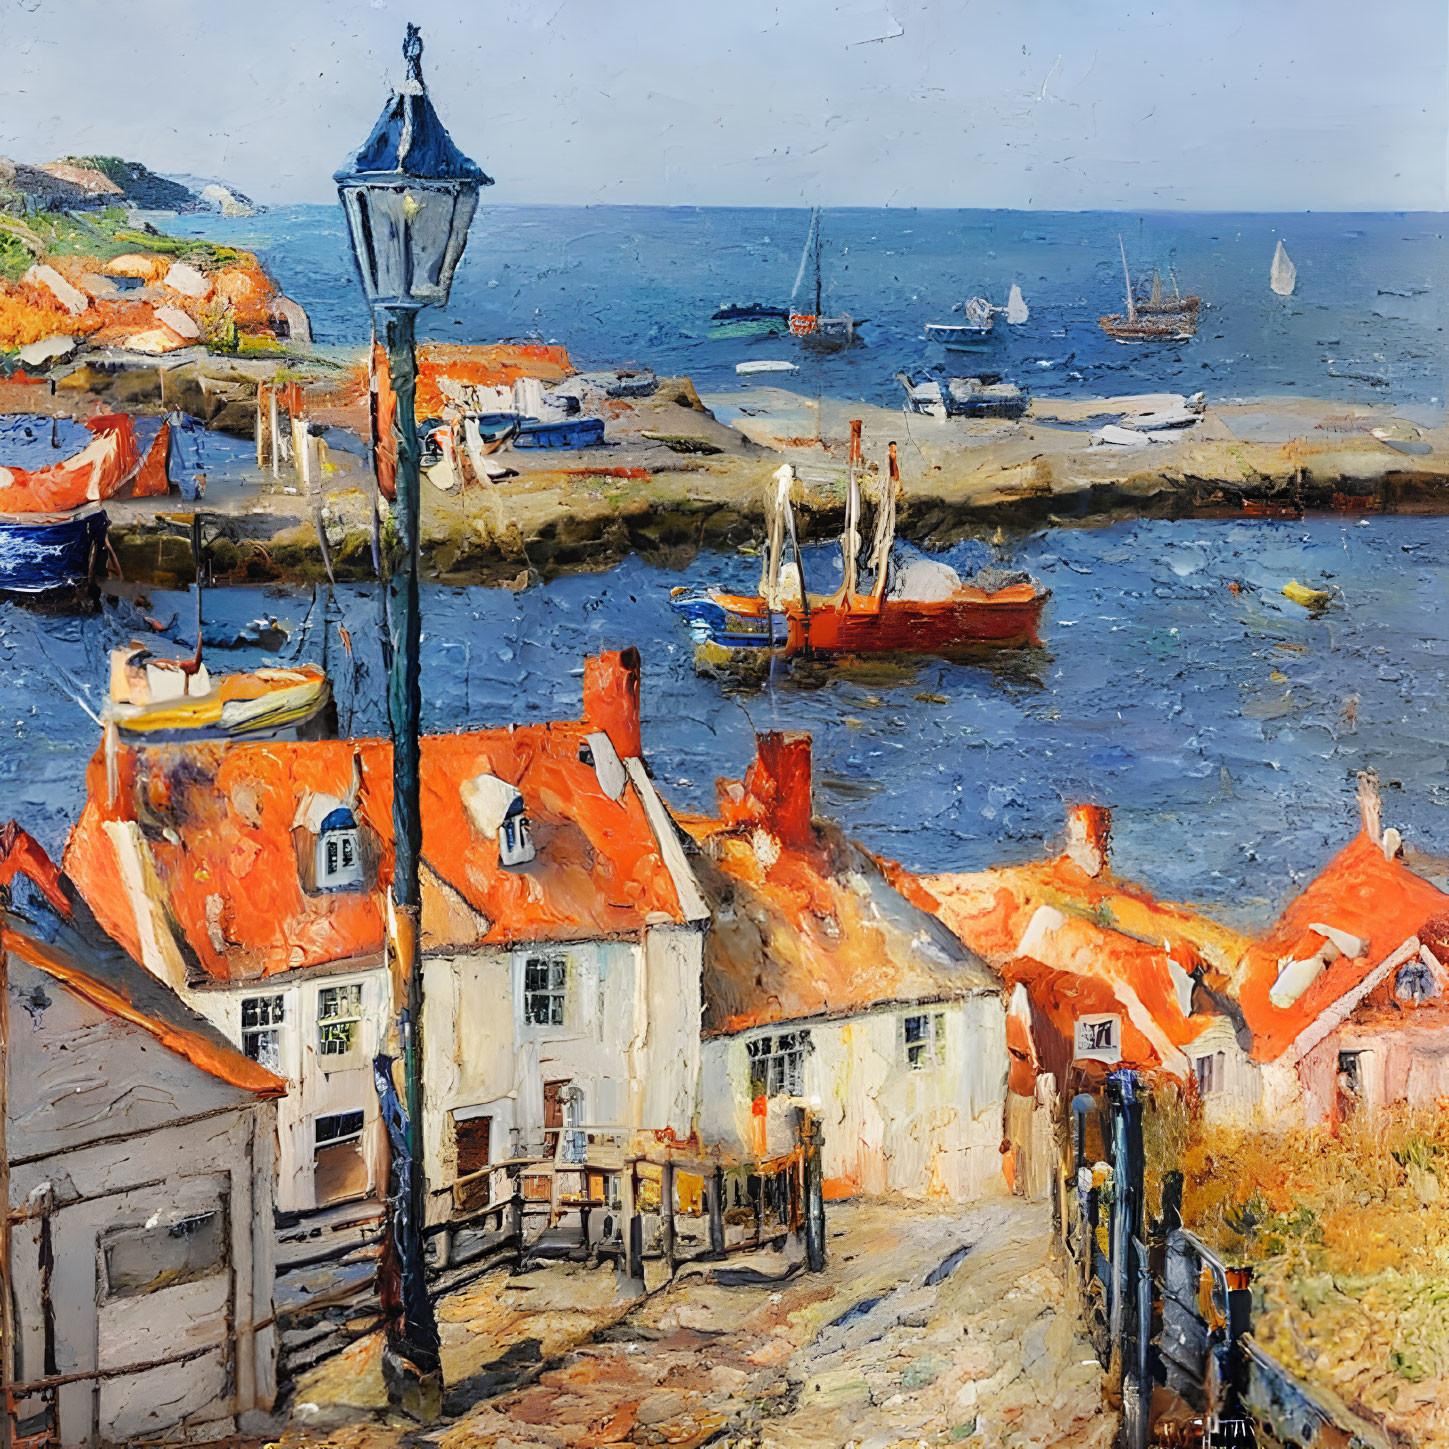 Colorful Coastal Village Painting with Orange-Roofed Houses & Boats